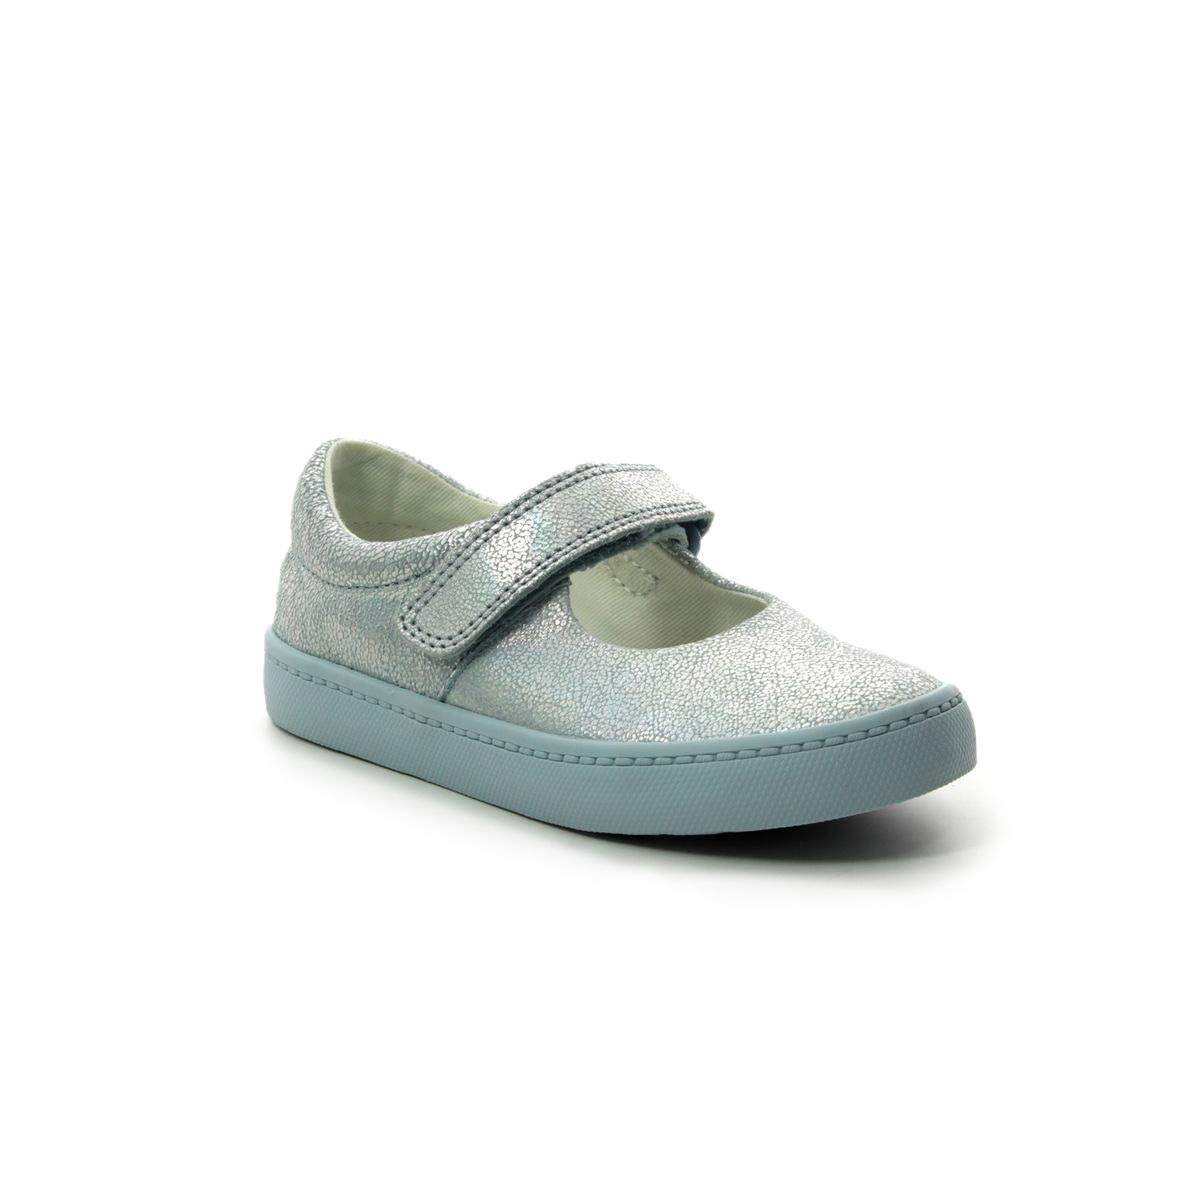 clarks first shoes uk